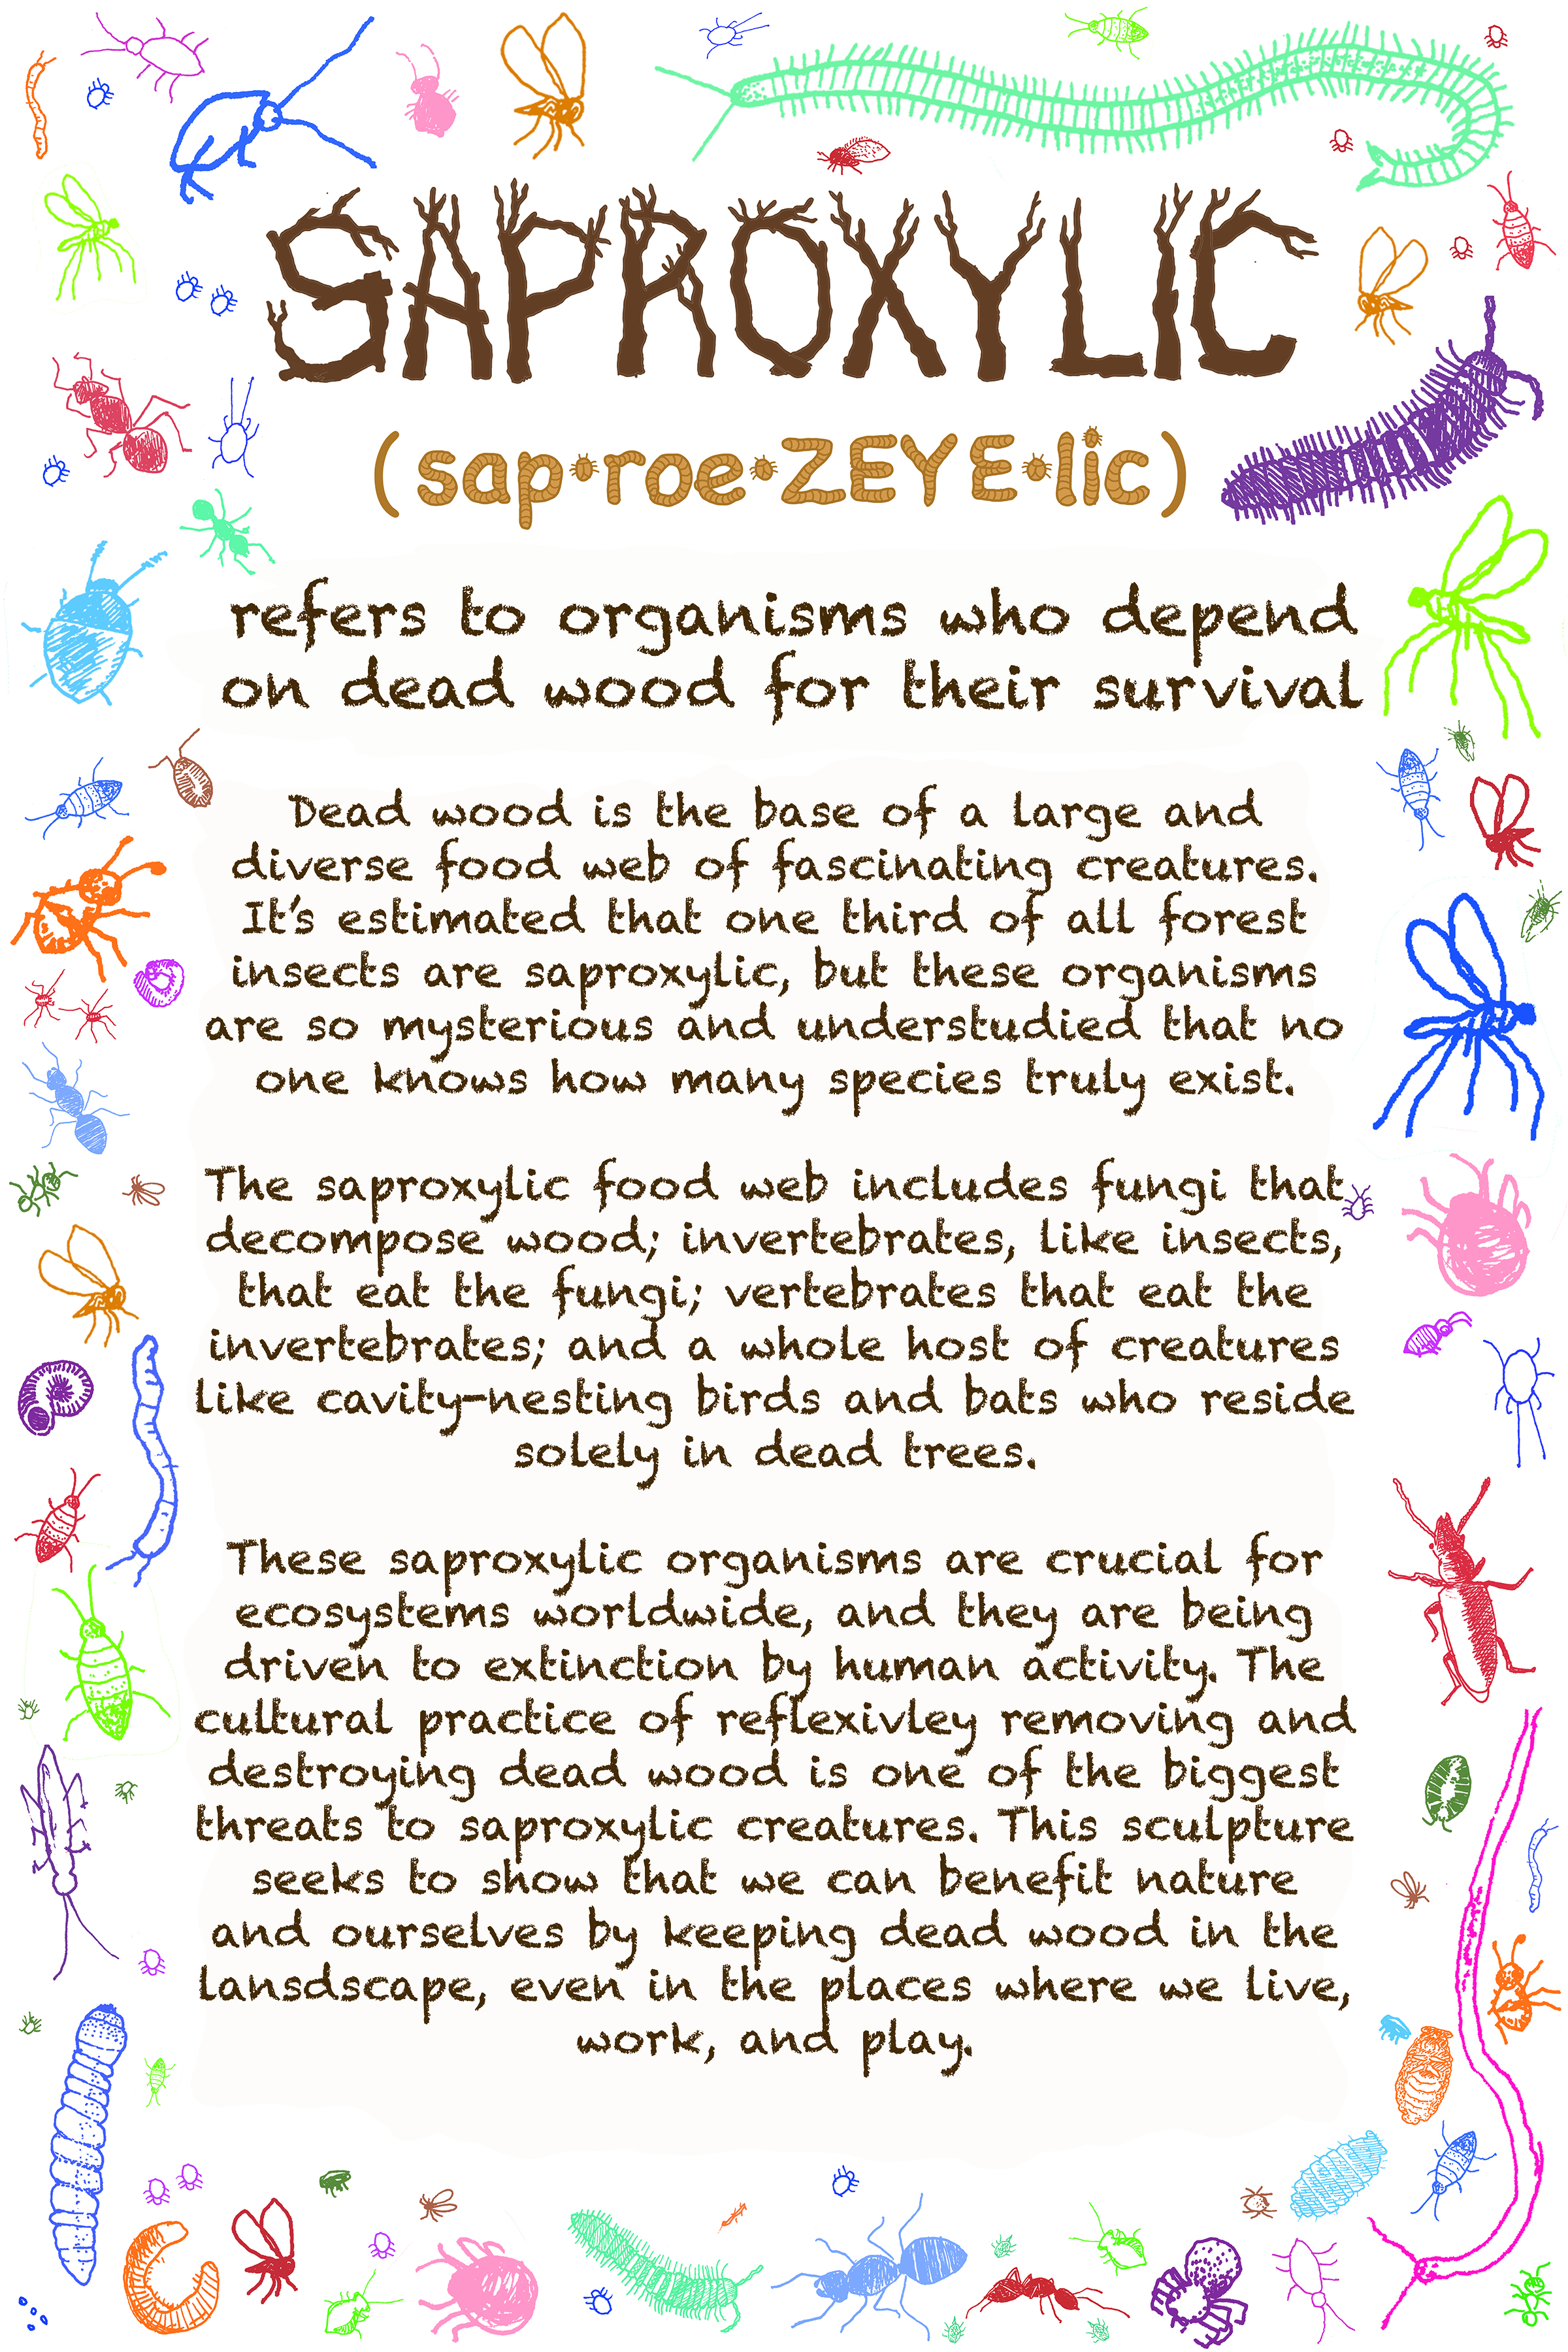 Flyer about saproxylic creatures.